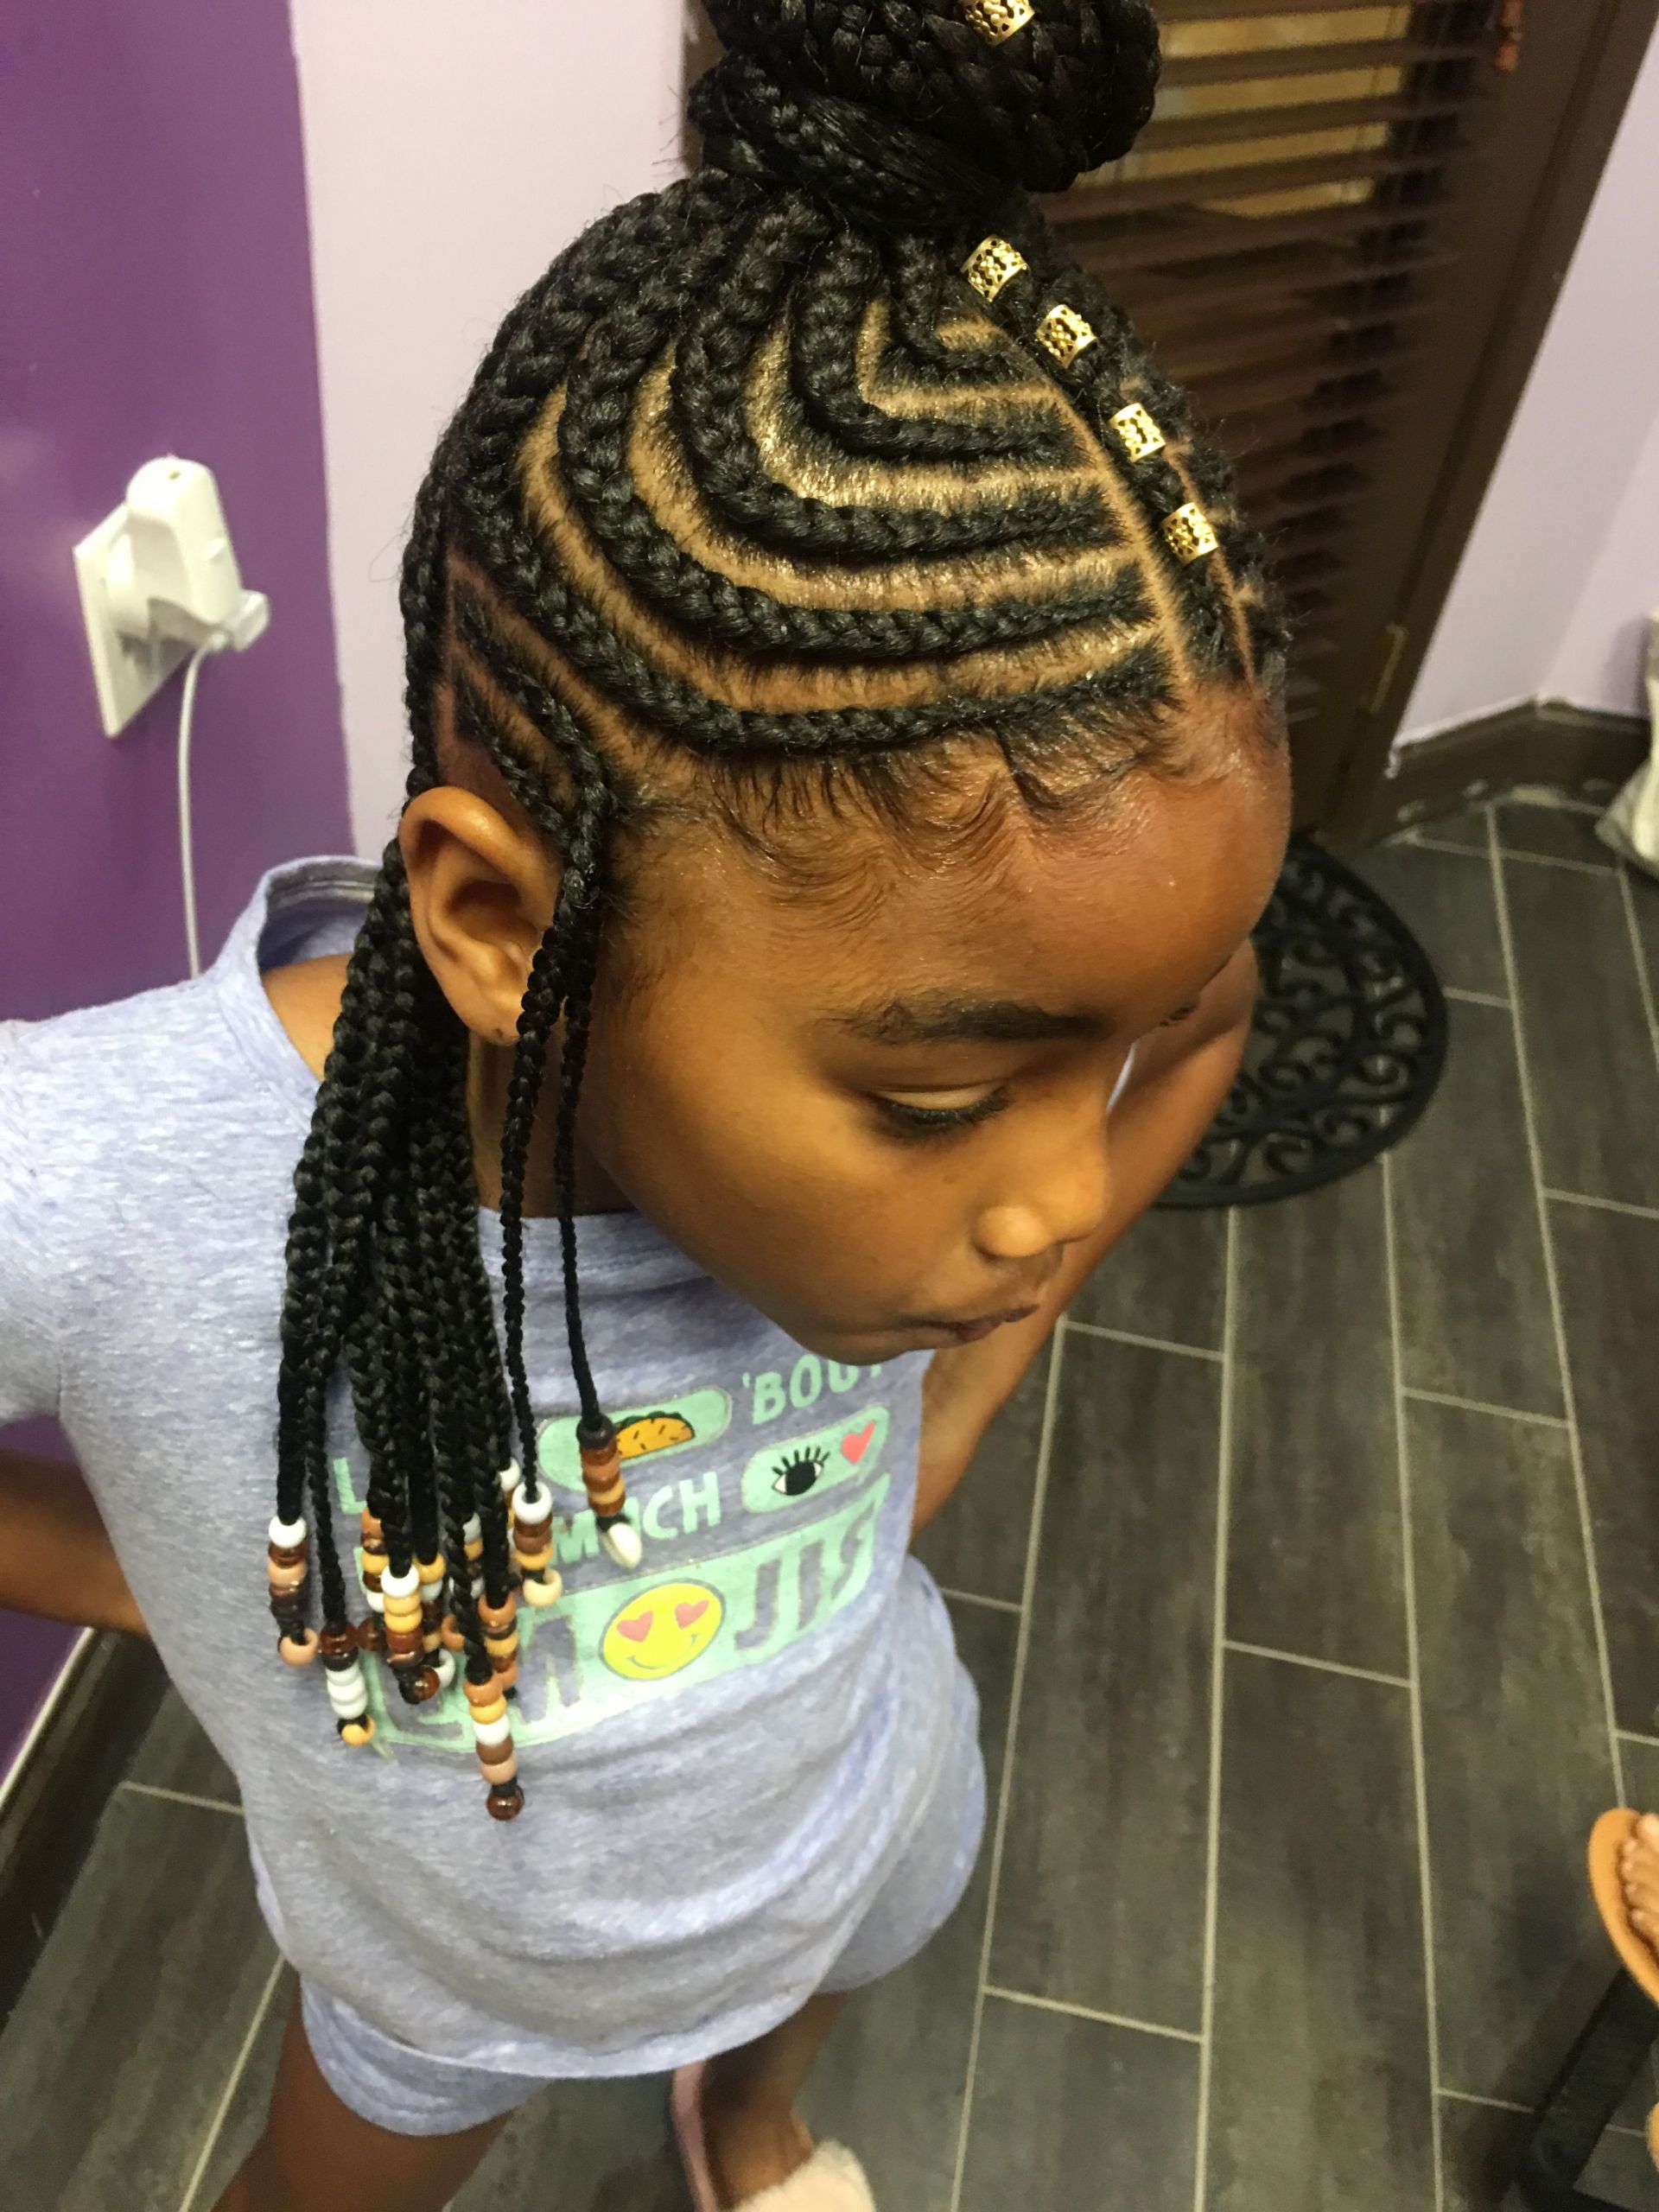 Hairstyle With Braids For Kids
 She Used Flat Twists To Create Fabulous Summer Curls